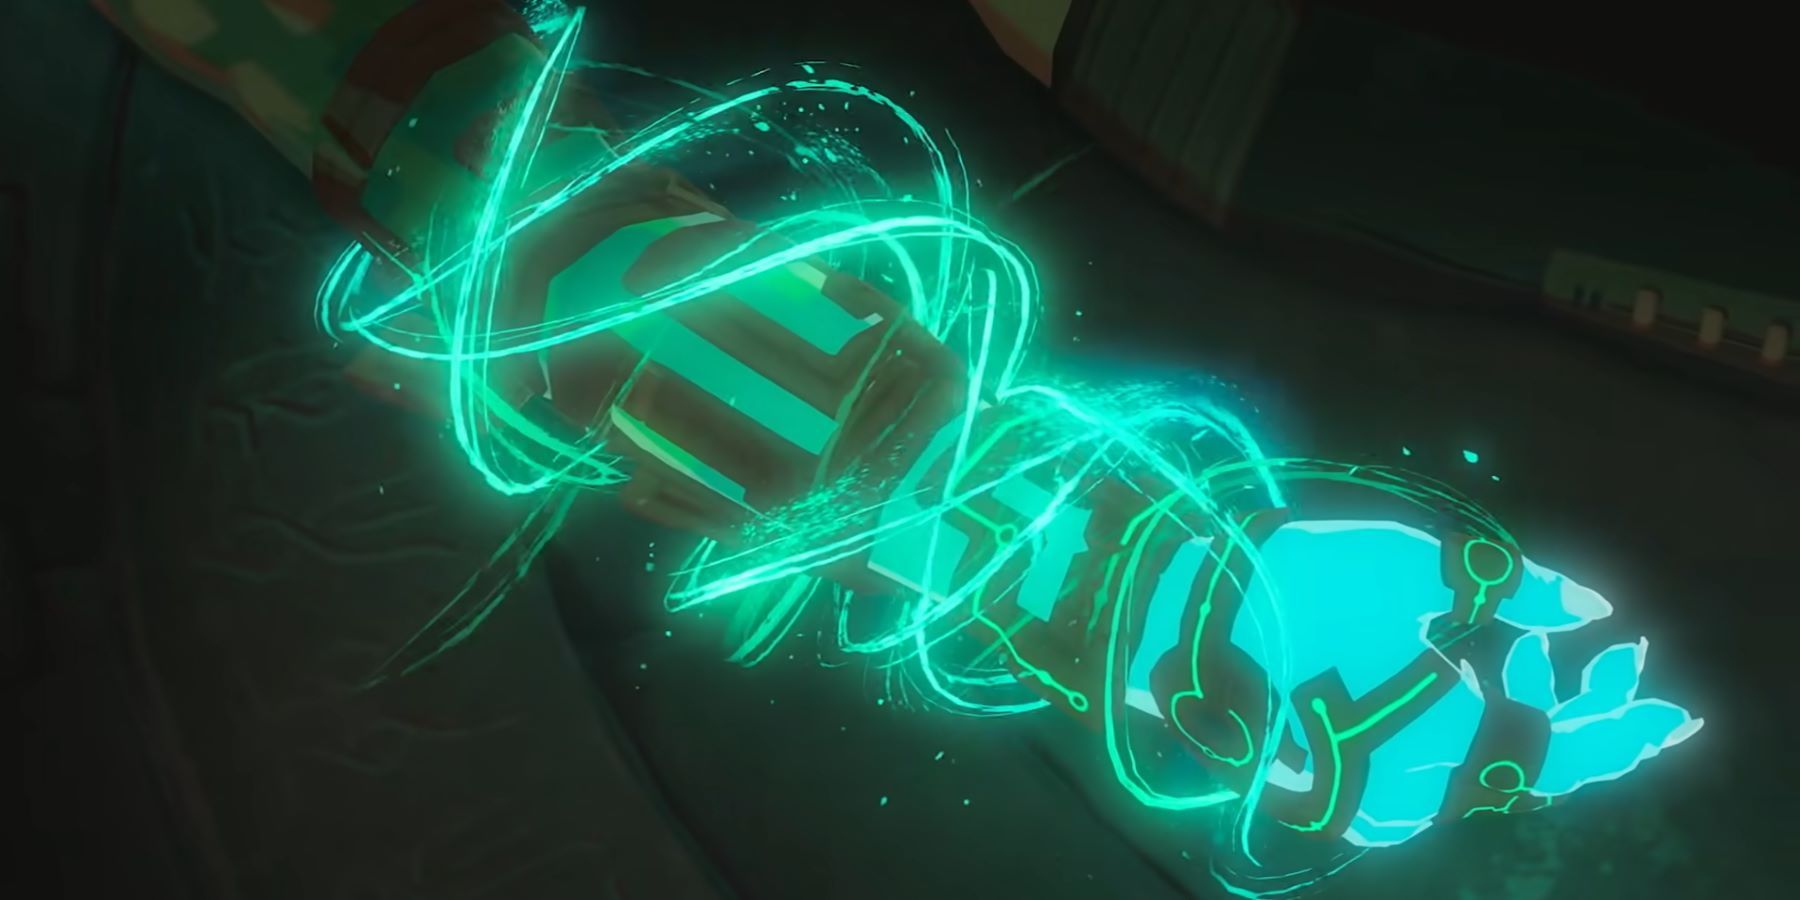 Link's arm getting infused with magic in The Legend of Zelda: Breath of the Wild 2